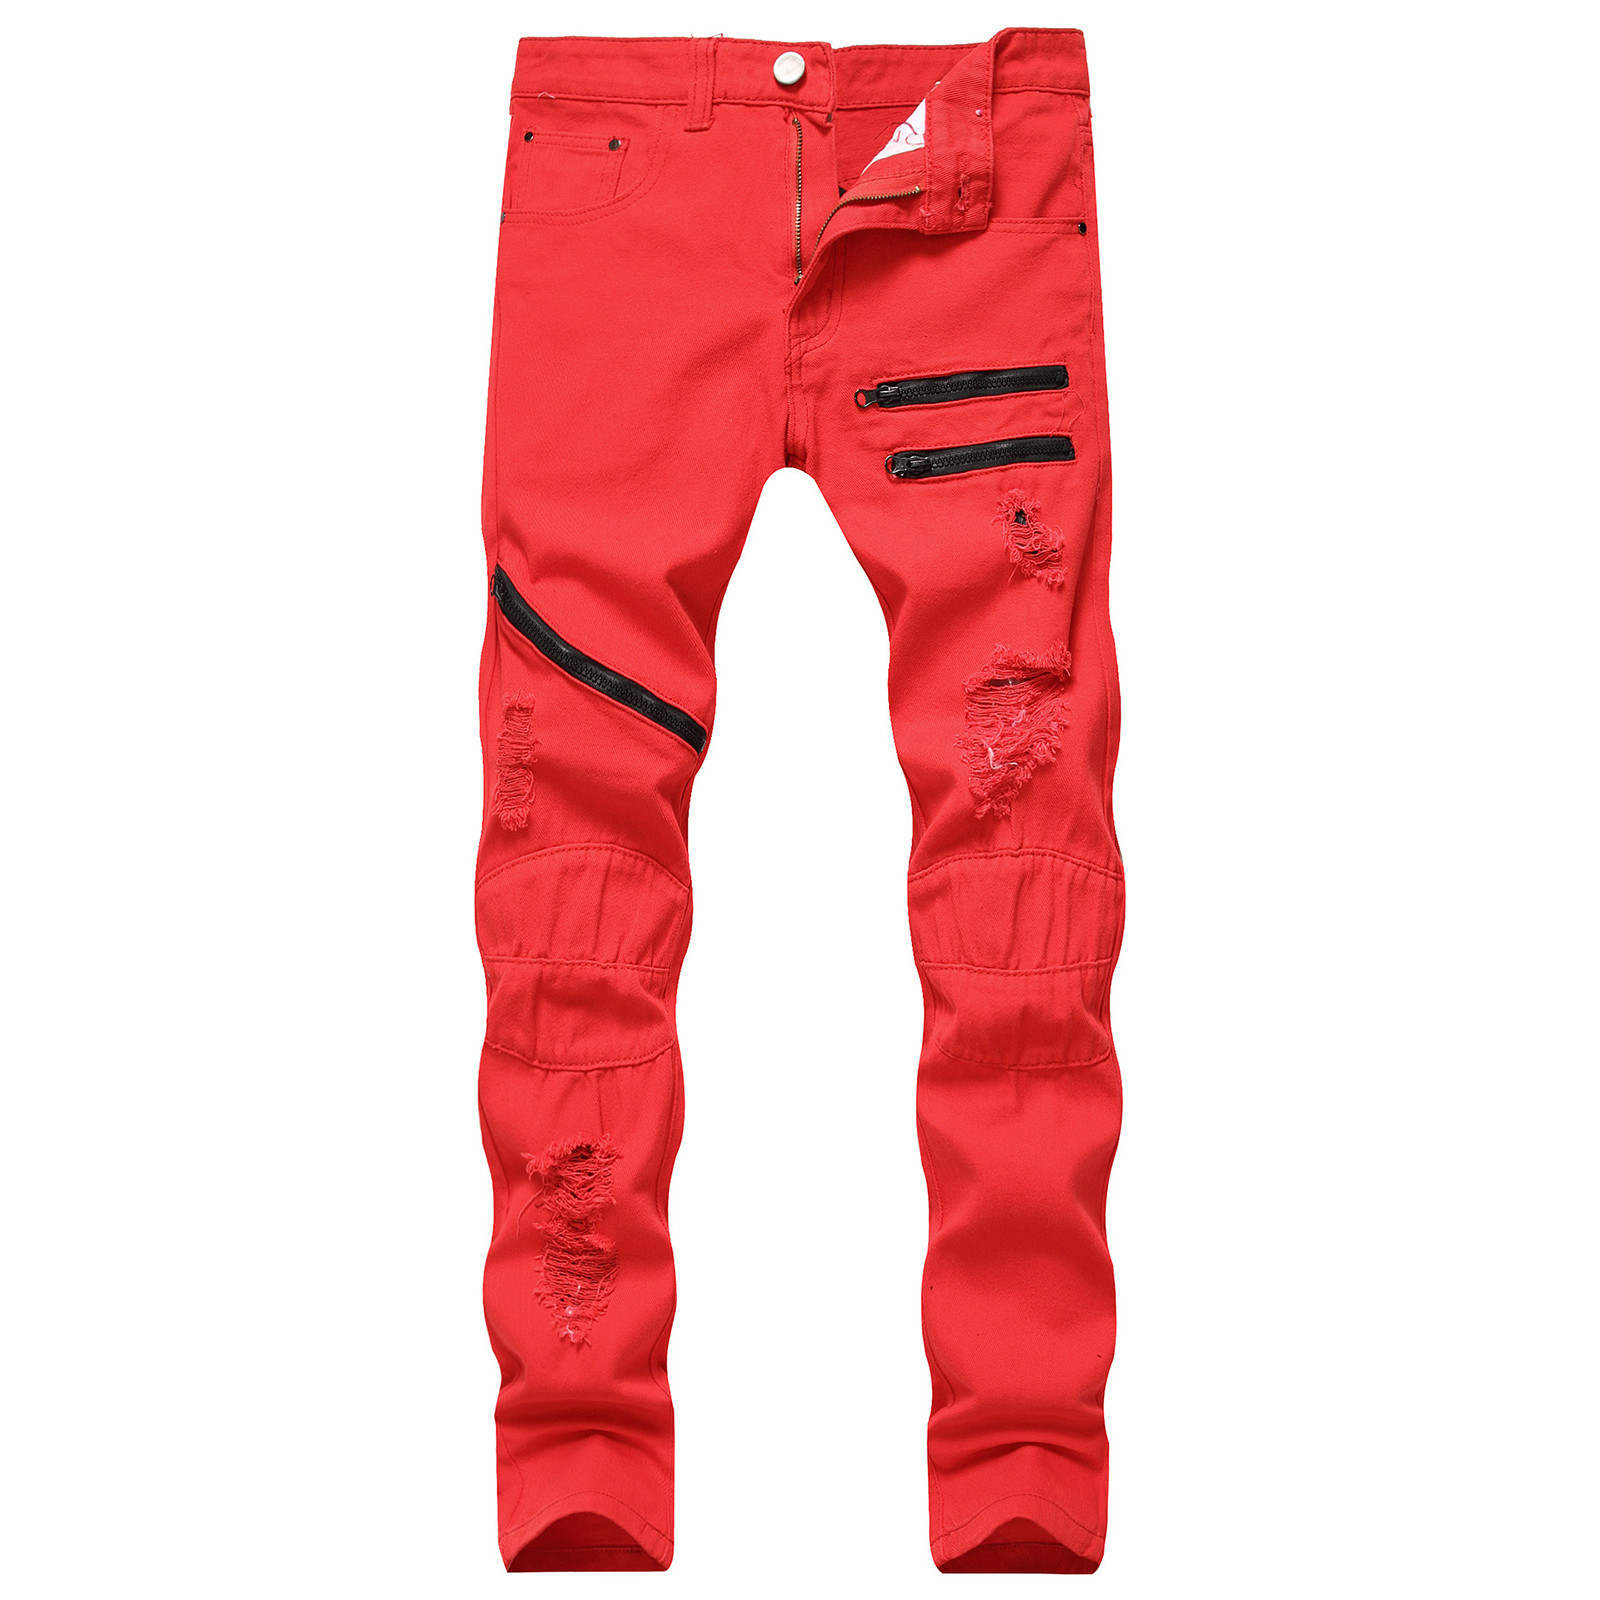 Pants for Men's Jeans Newly Slim Ripped Hip-hop Stretch Denim Cargo Pants Motorcycle Capri Trouse Pencil Pants - image 3 of 4